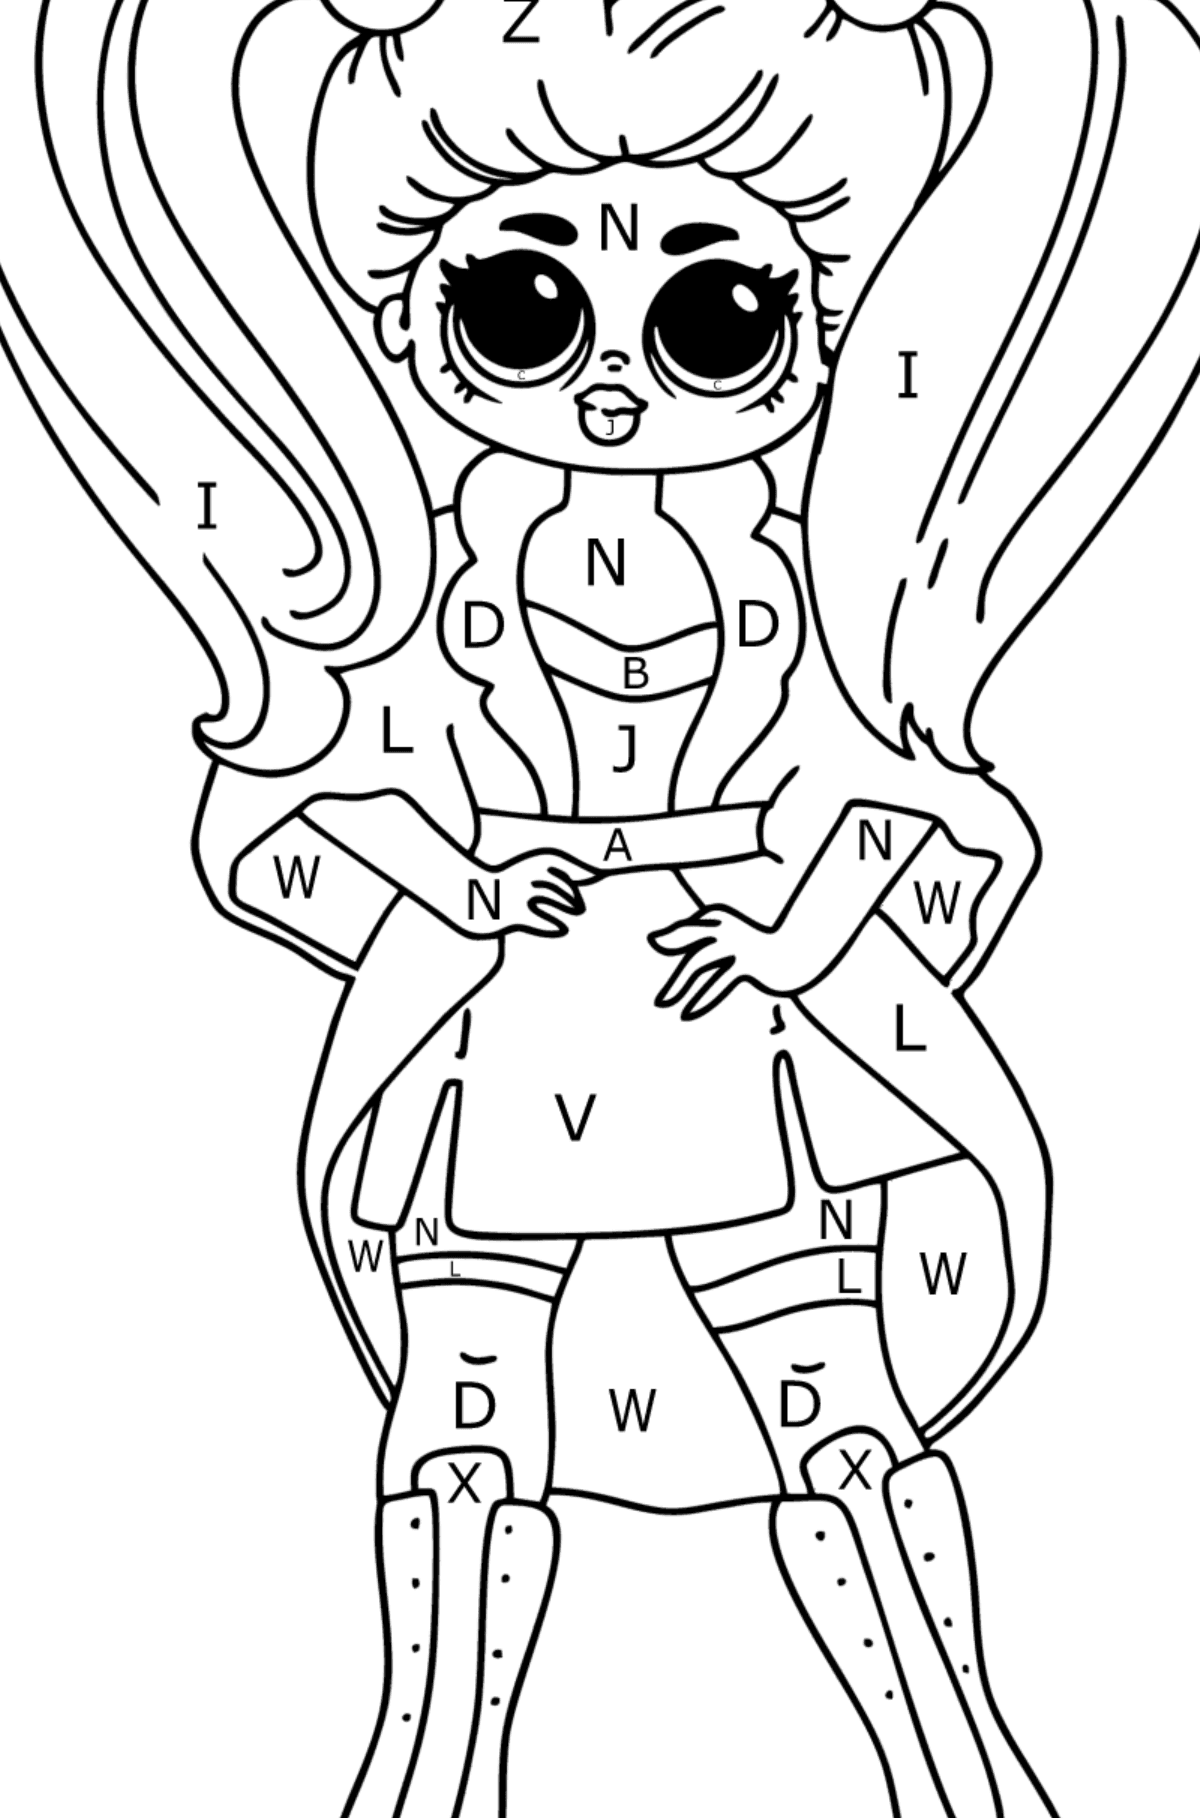 Coloring page LOL OMG Doll - Coloring by Letters for Kids